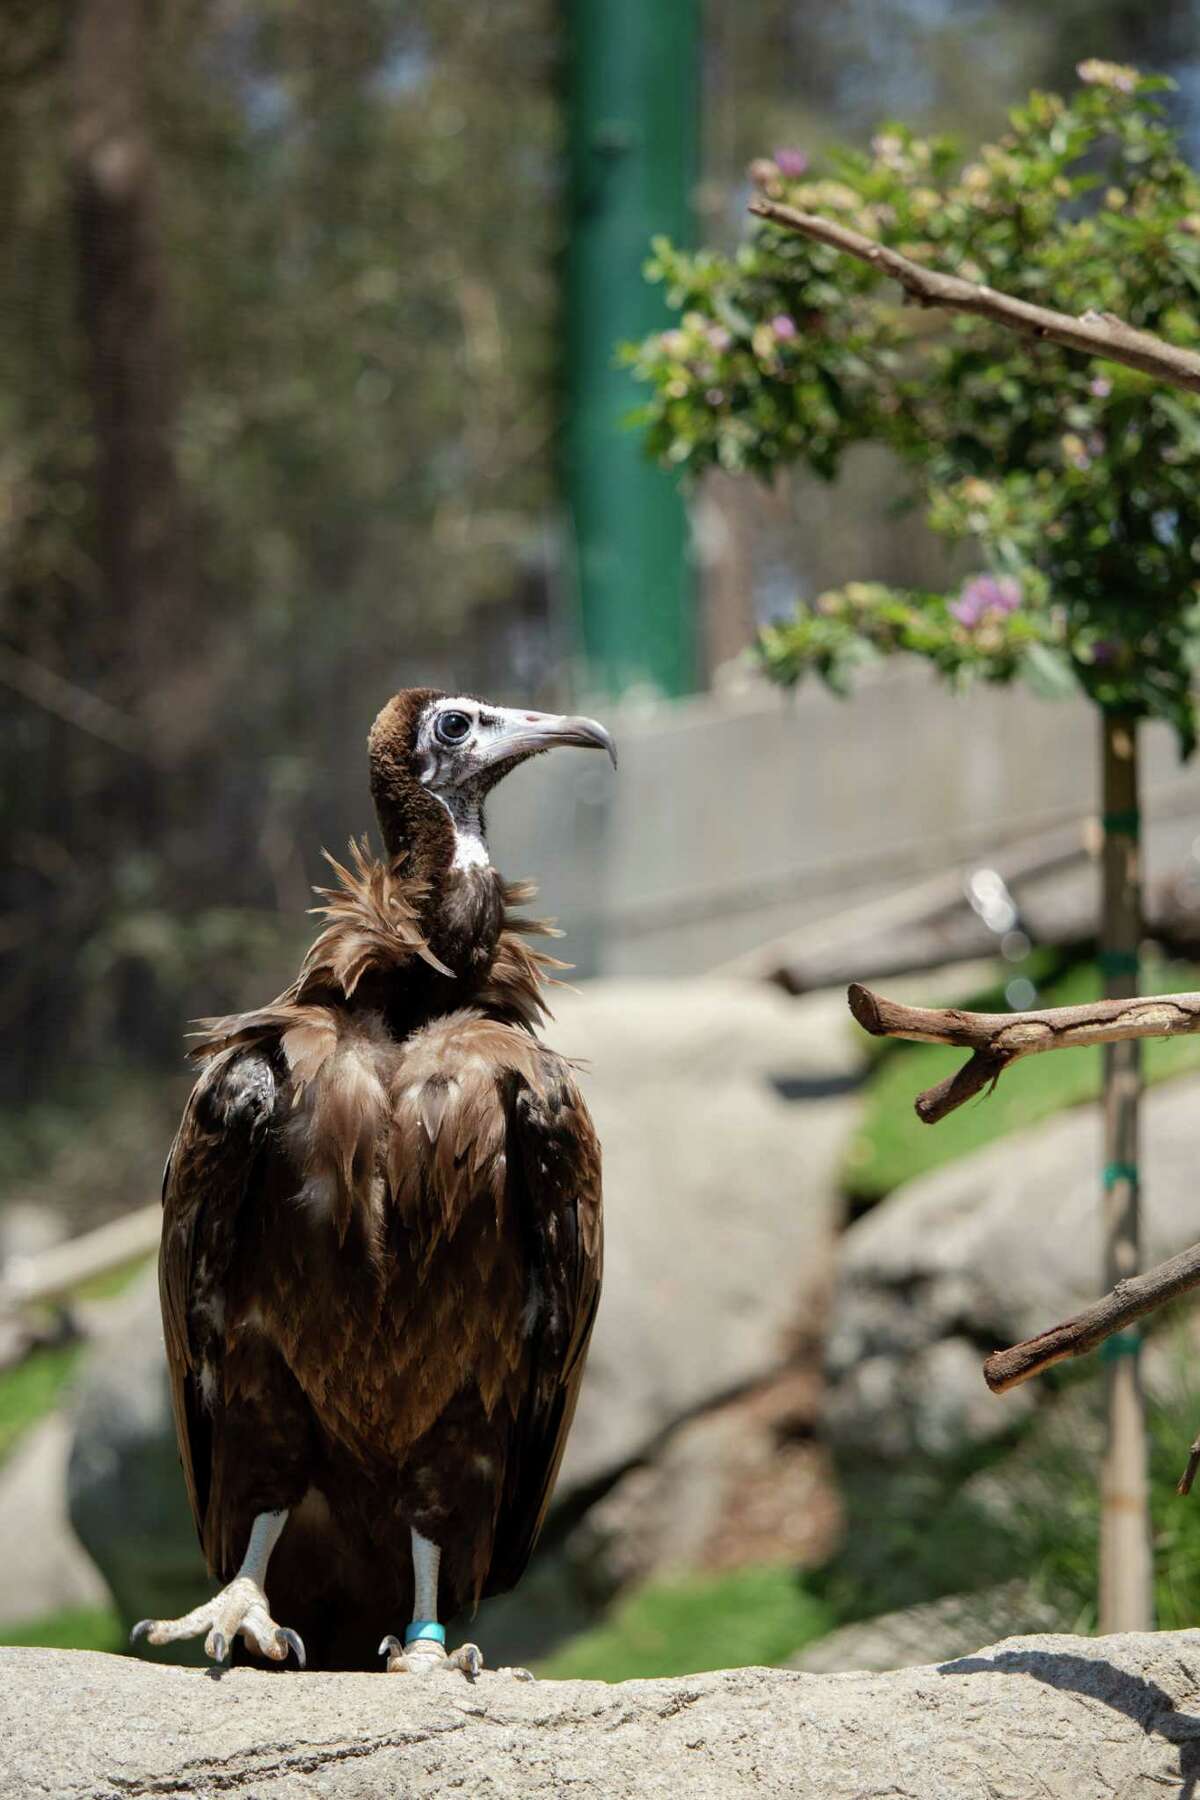 The African Hooded Vulture, an endangered species, escaped from the Oakland Zoo’s new aviary after a tree toppled over and destroyed the structure.